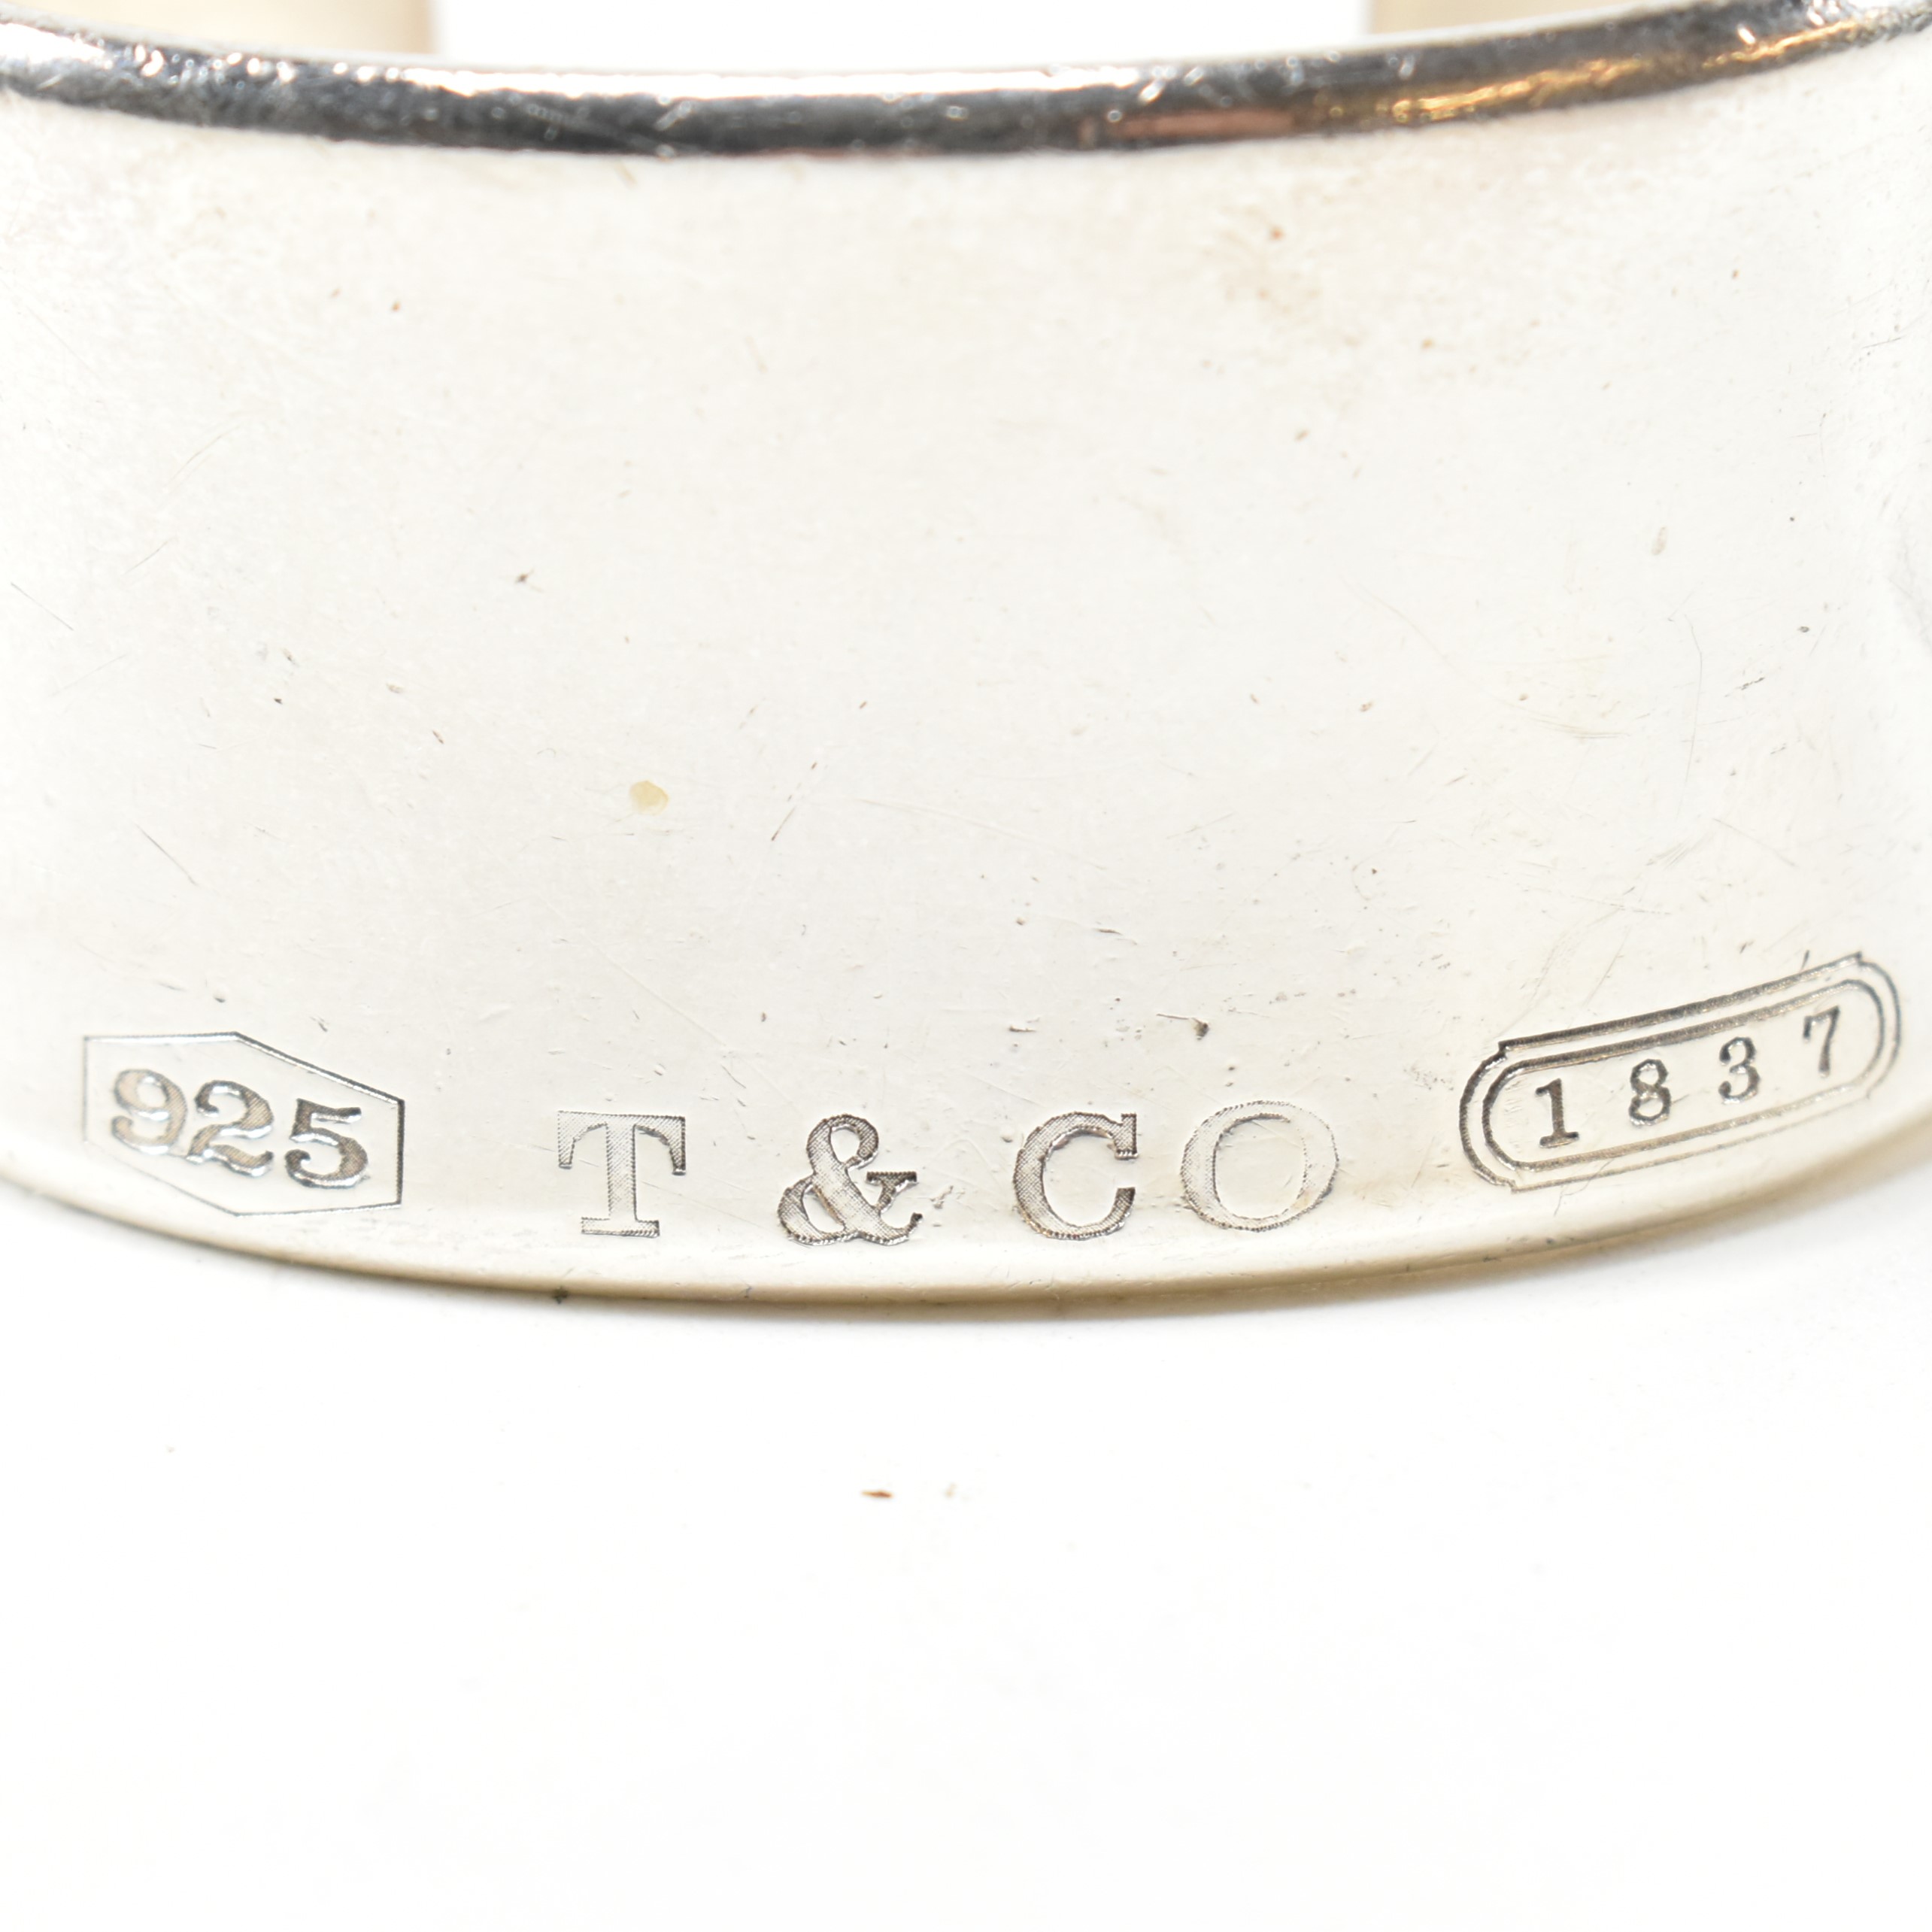 TIFFANY & CO 1837 STERLING SILVER WIDE CUFF BANGLE - Image 5 of 7